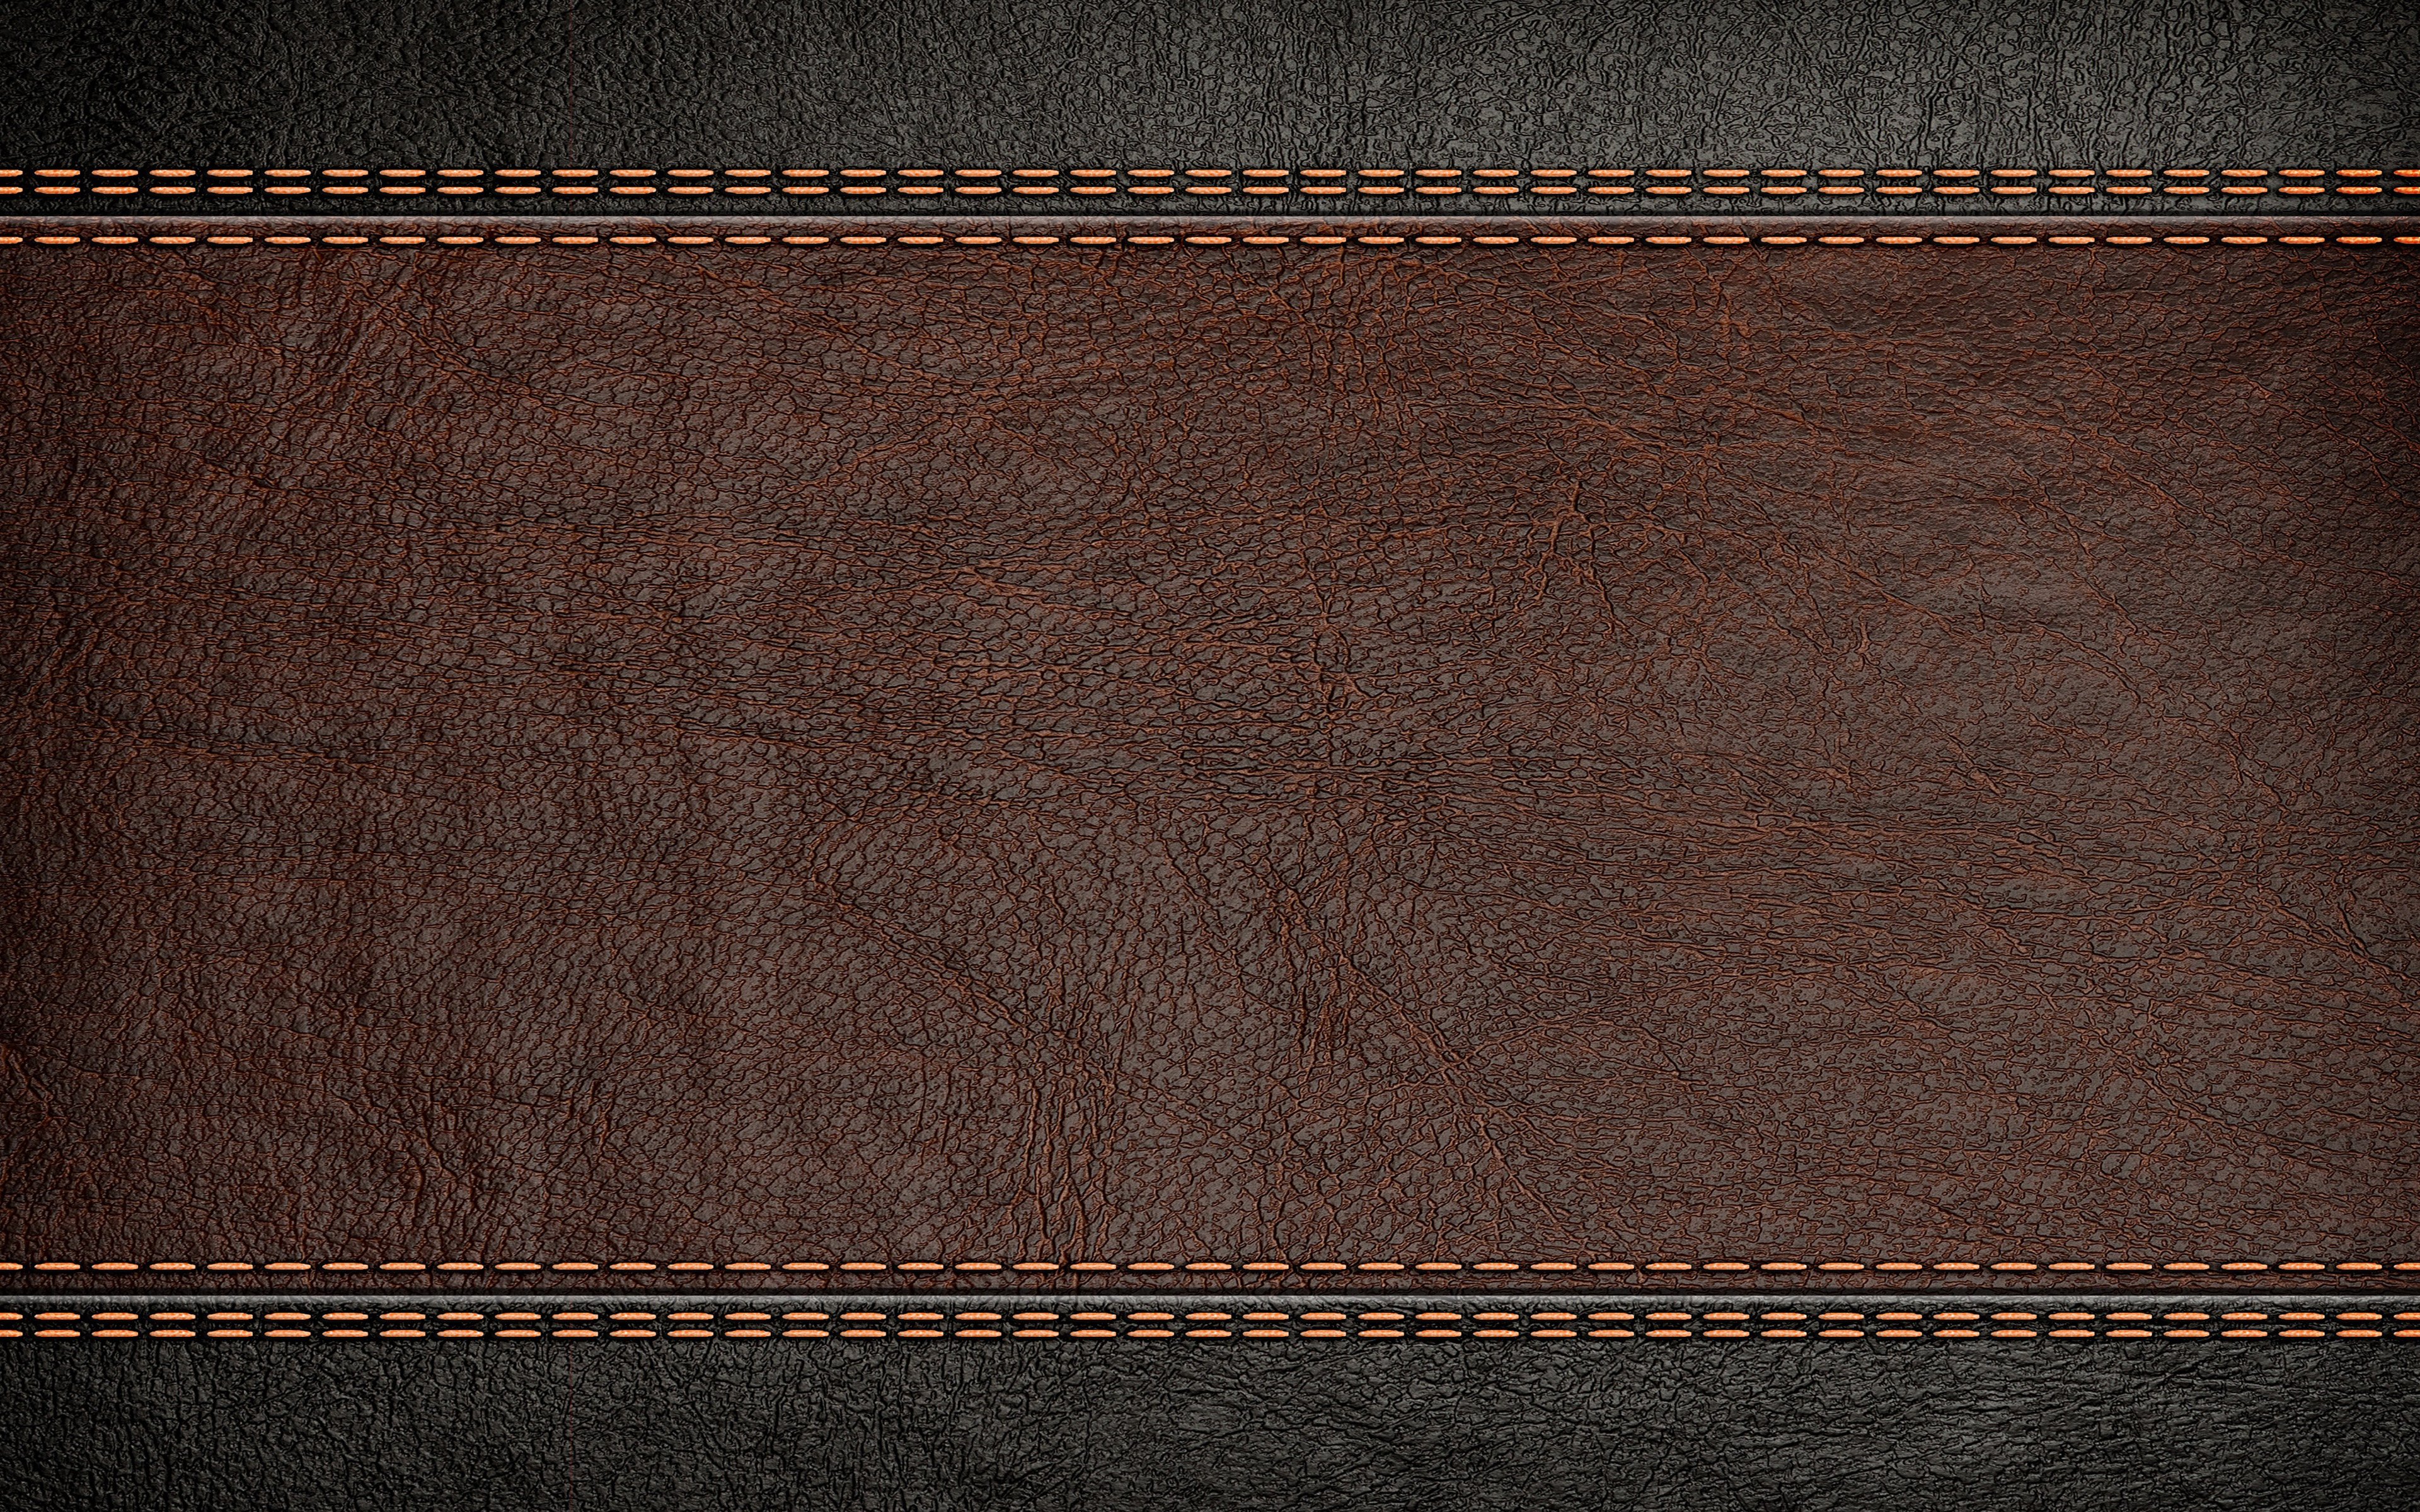 Tooled Leather Texture